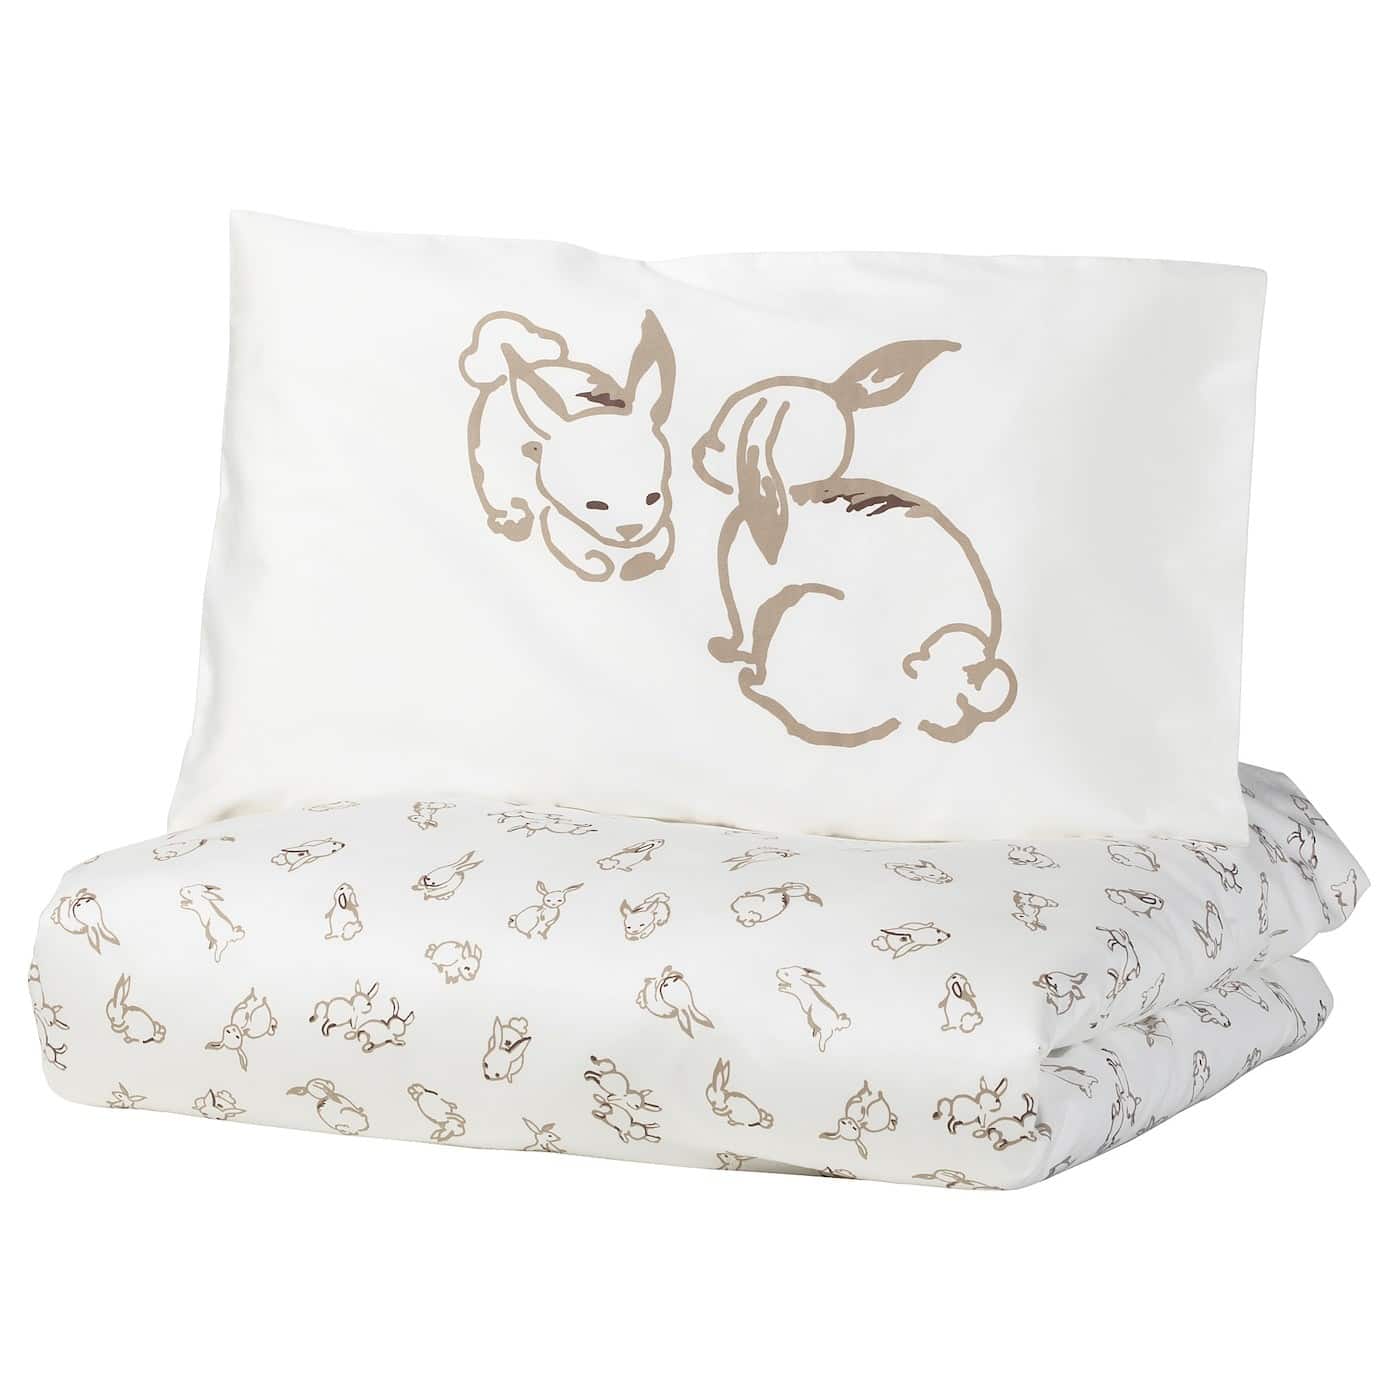 roedhake-quilt-cover-pillowcase-for-cot-rabbit-pattern-white-beige__0715298_PE730412_S5